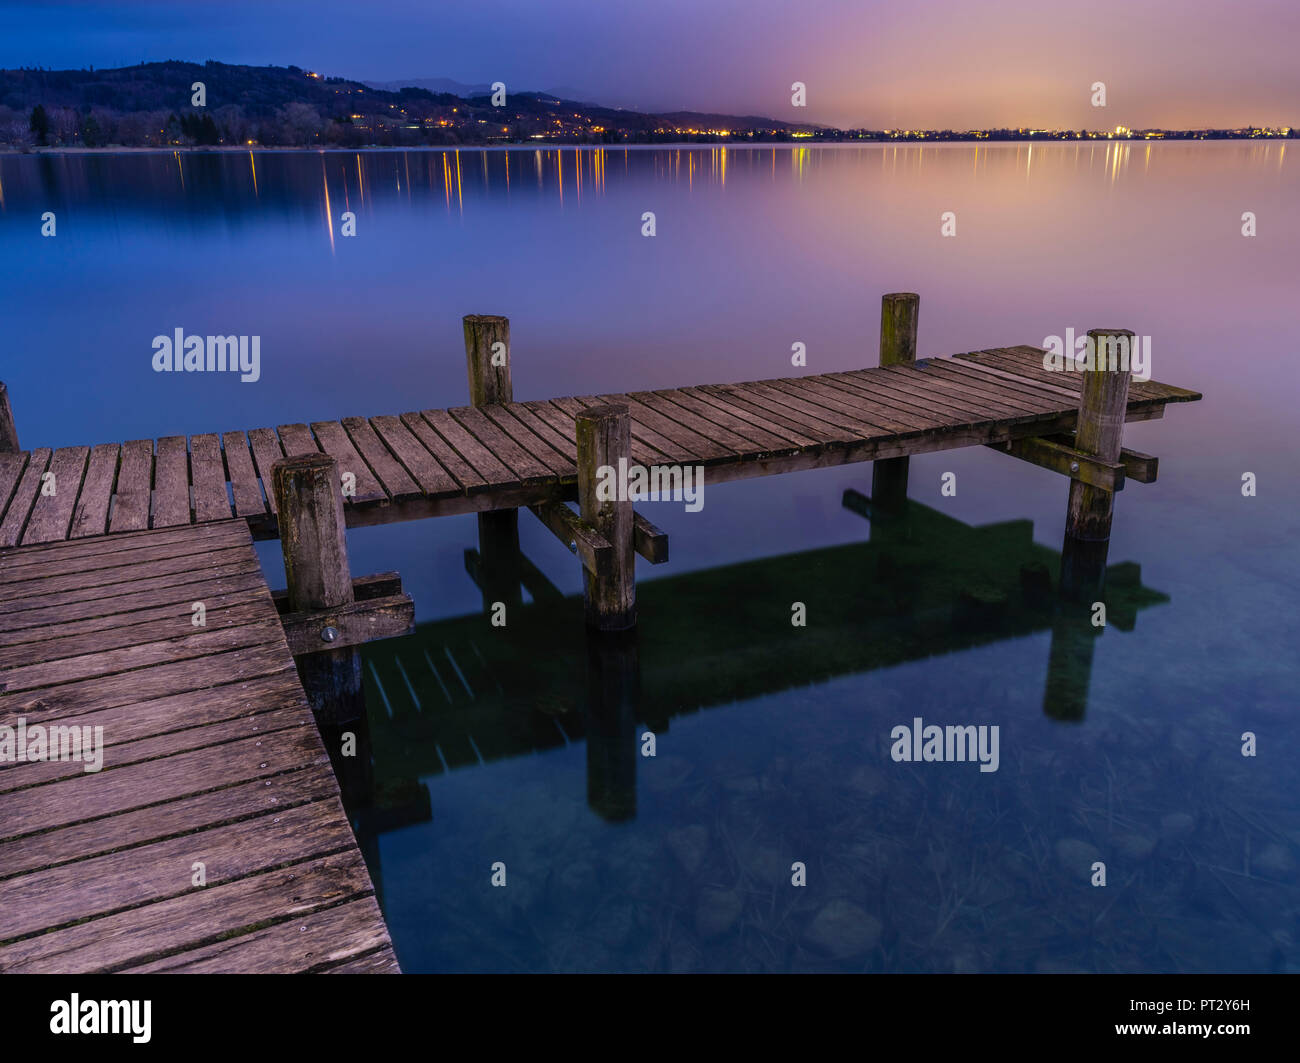 The lights of Wetzikon reflecting from the sky over the Pfäffikersee Stock Photo